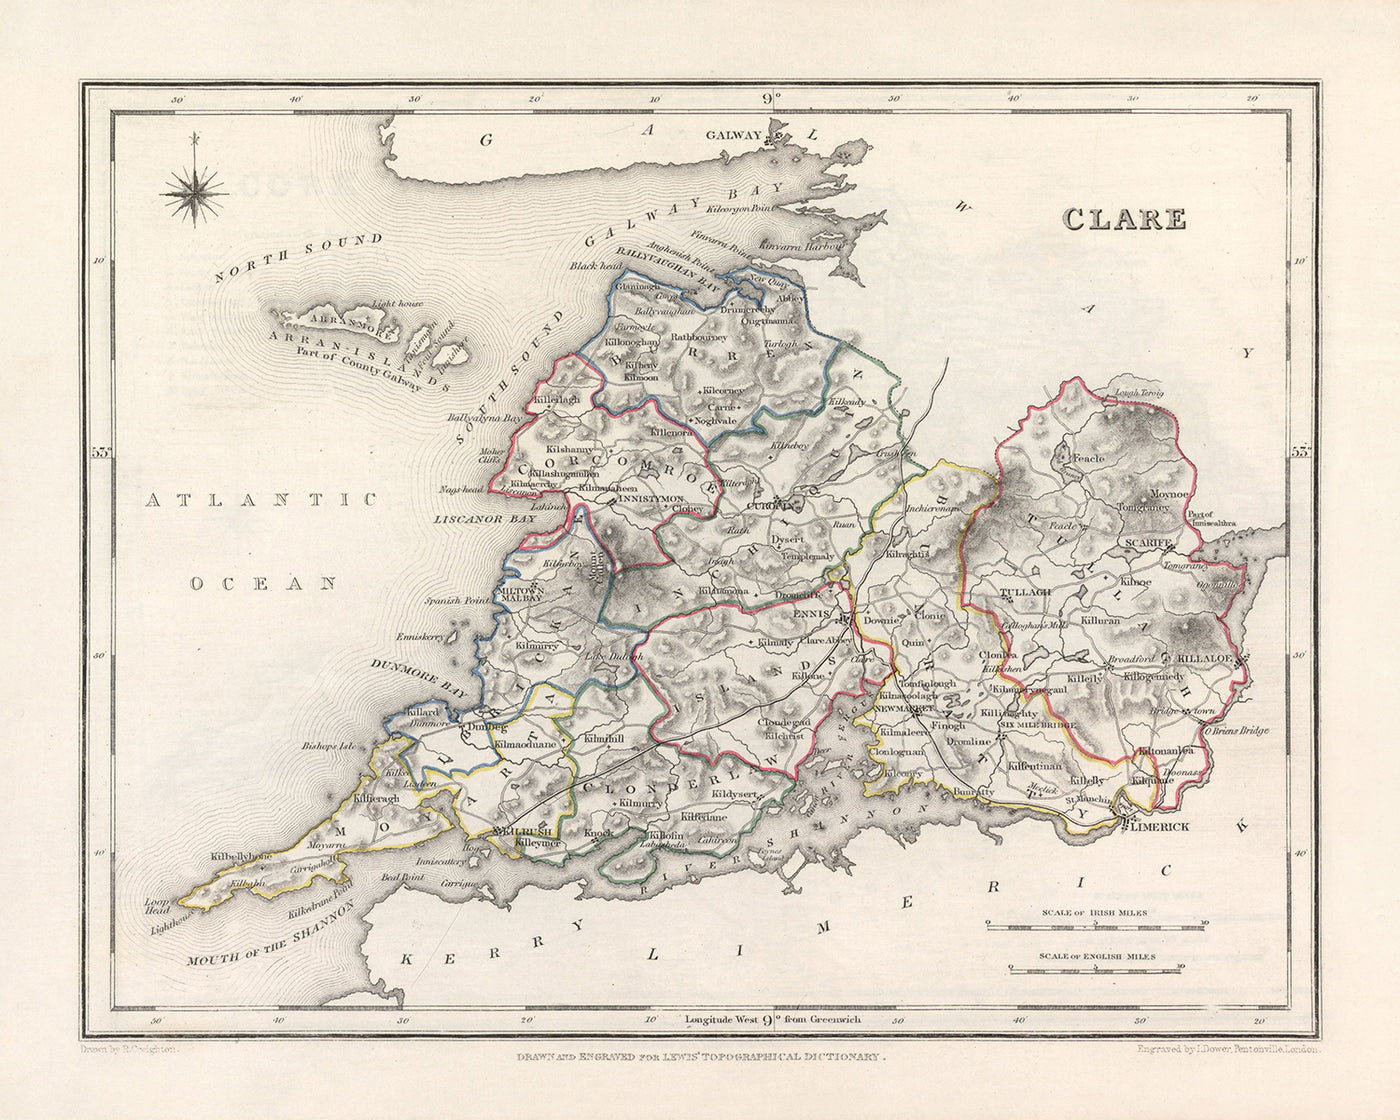 Old Map of County Clare by Samuel Lewis, 1844: Ennis, Kilrush, Shannon Estuary, Loop Head Peninsula, and Burren Landscape